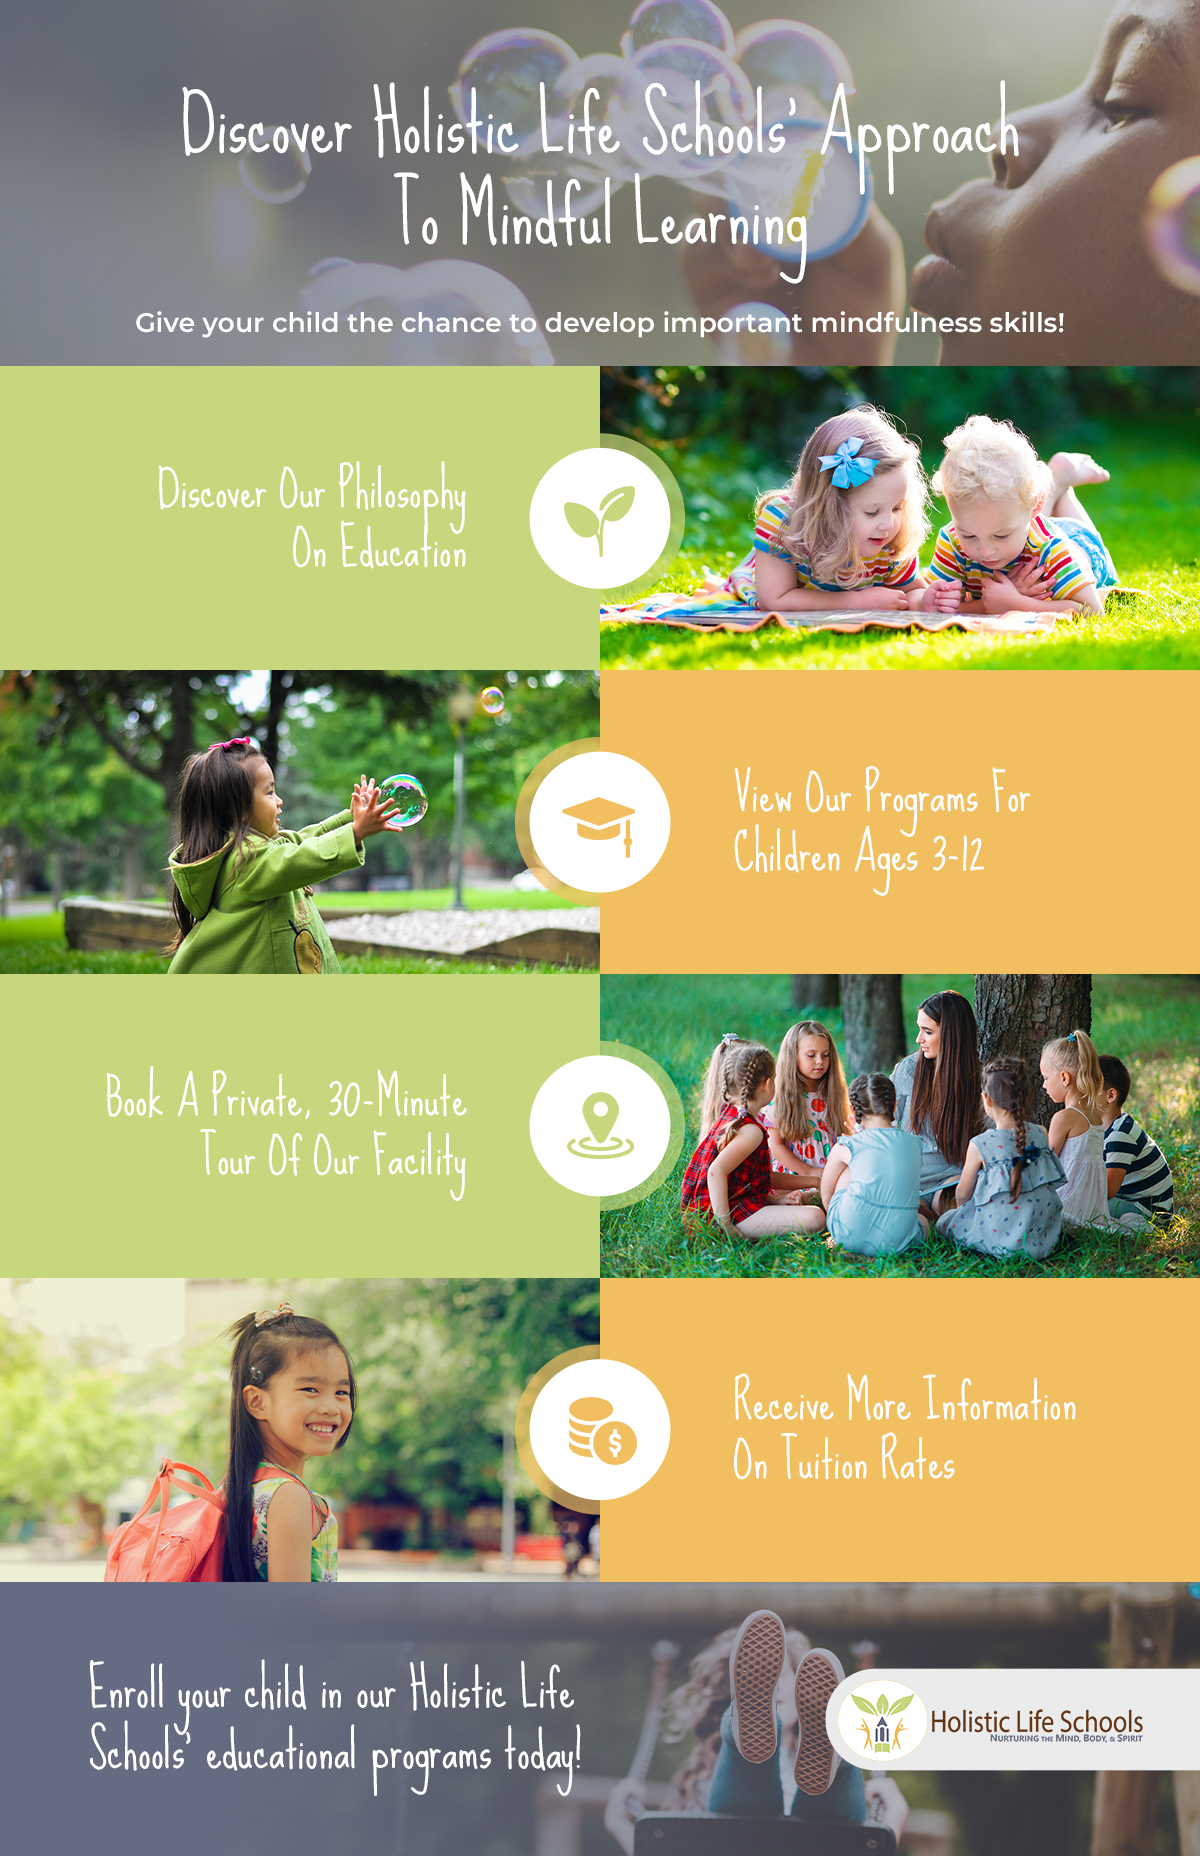 Discover Holistic Life Schools' Approach To Mindful Learning Infographic